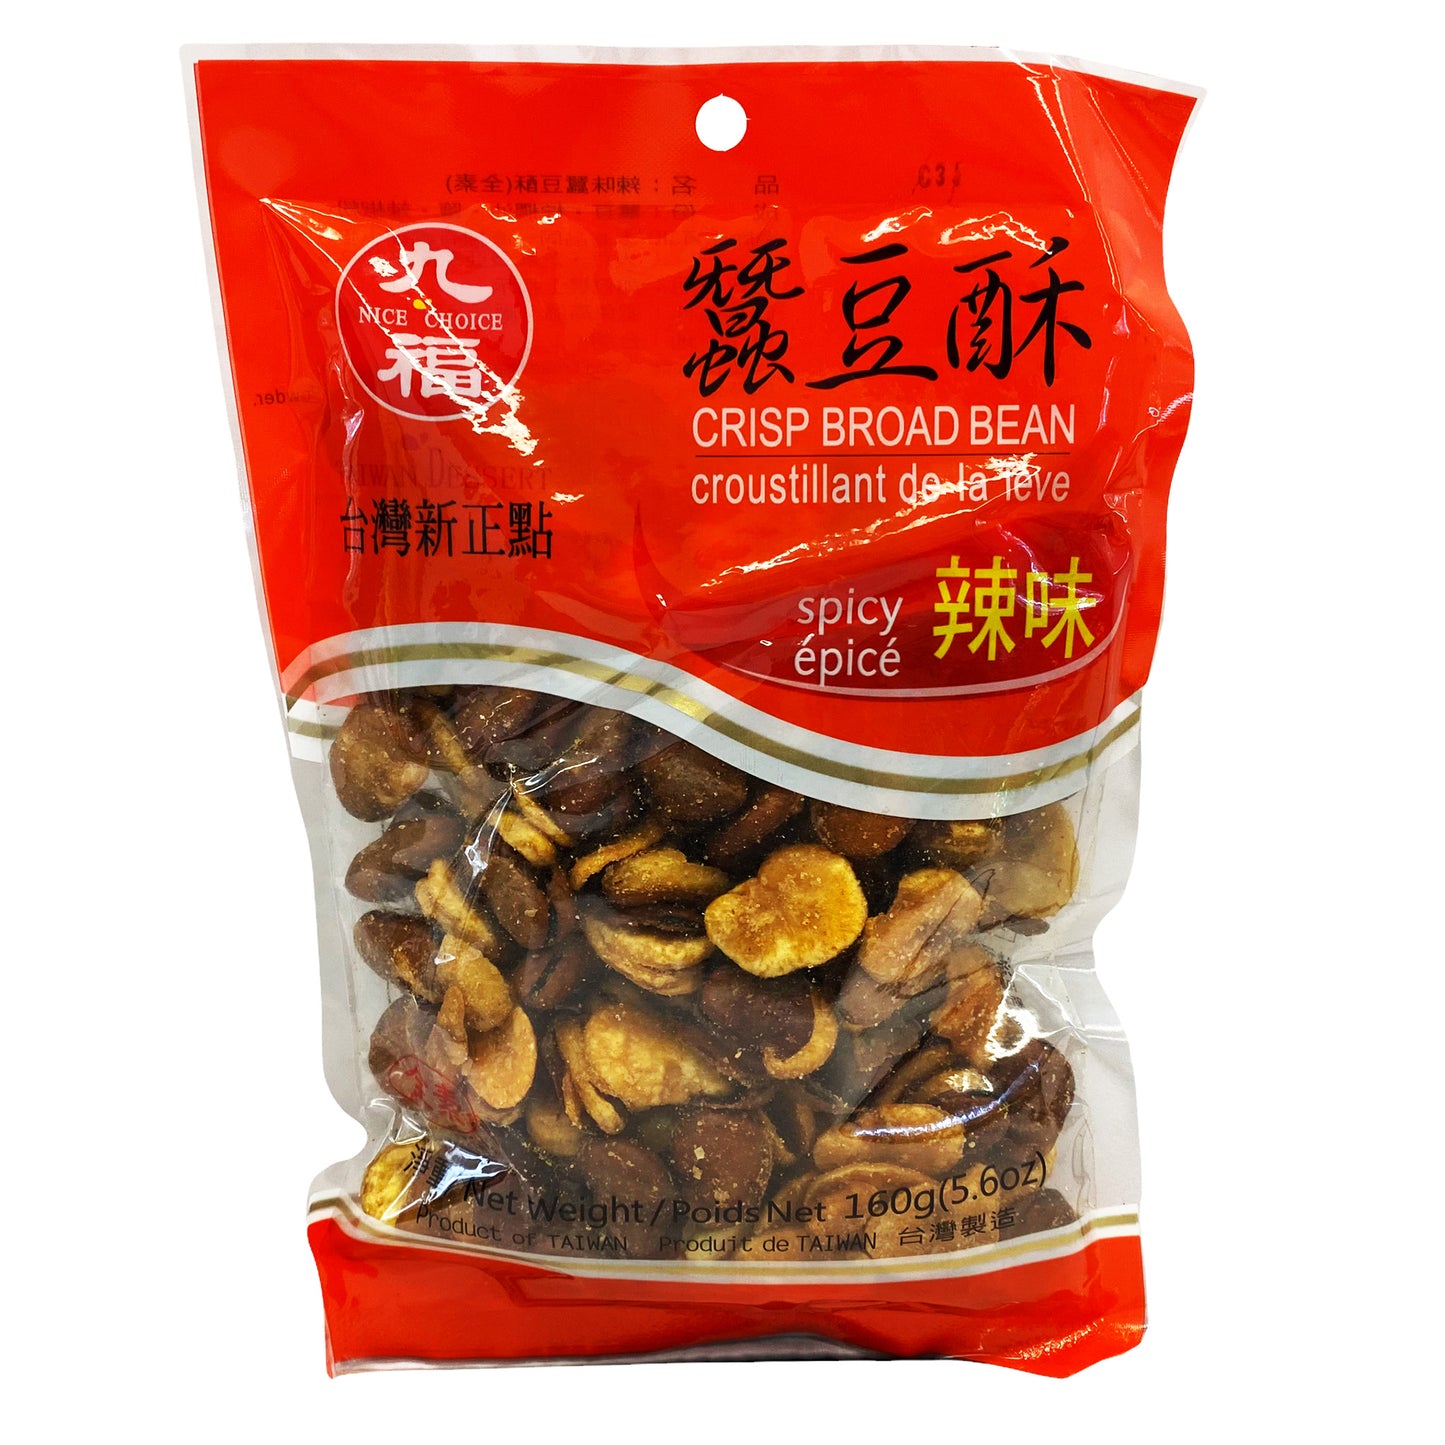 Front graphic image of Nice Choice Spicy Crispy Broad Bean 5.6oz (160g) - 九福 辣味蚕豆酥 5.6oz (160g)